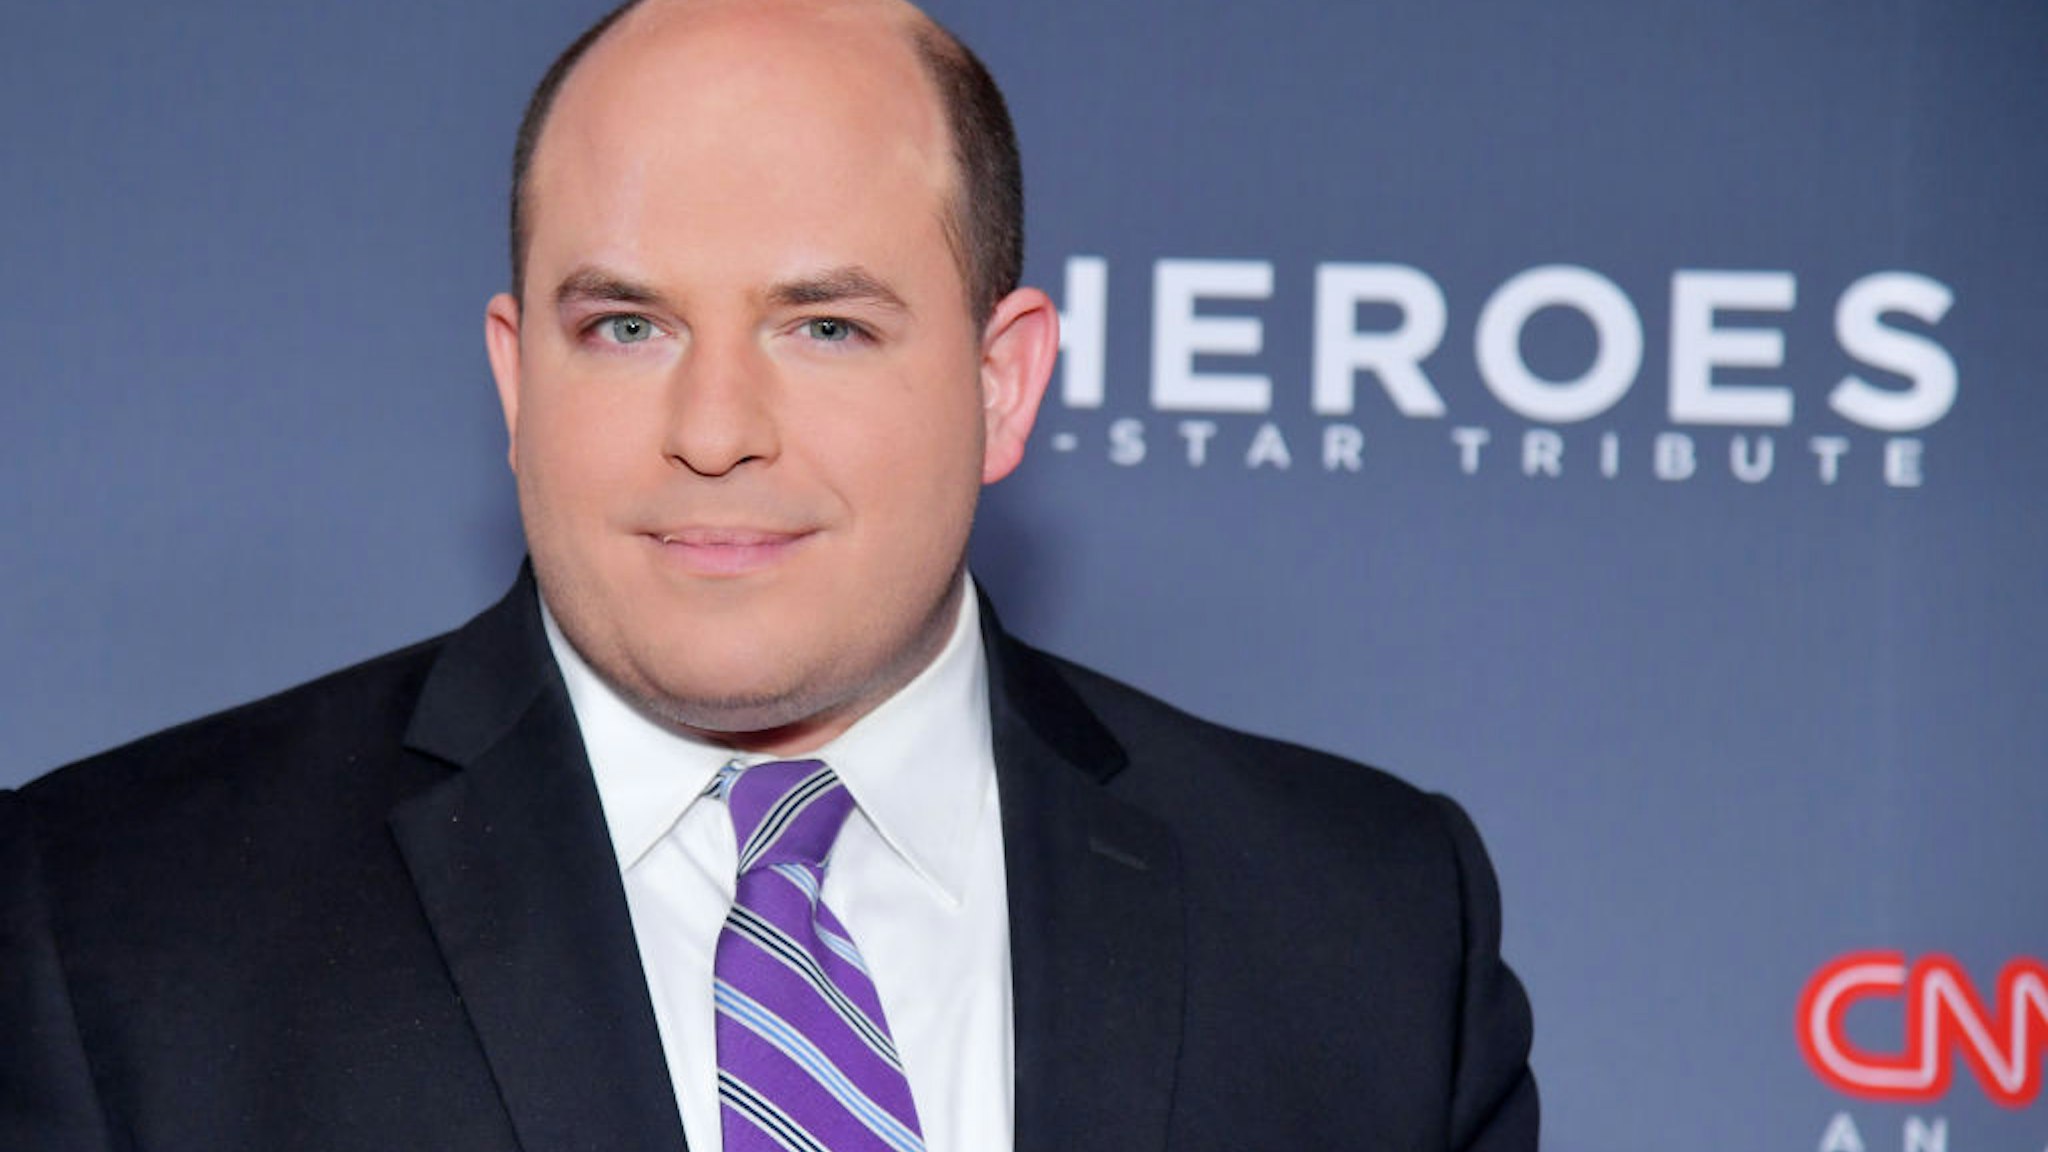 NEW YORK, NY - DECEMBER 09: Brian Stelter attends the 12th Annual CNN Heroes: An All-Star Tribute at American Museum of Natural History on December 9, 2018 in New York City. (Photo by Michael Loccisano/Getty Images for CNN )